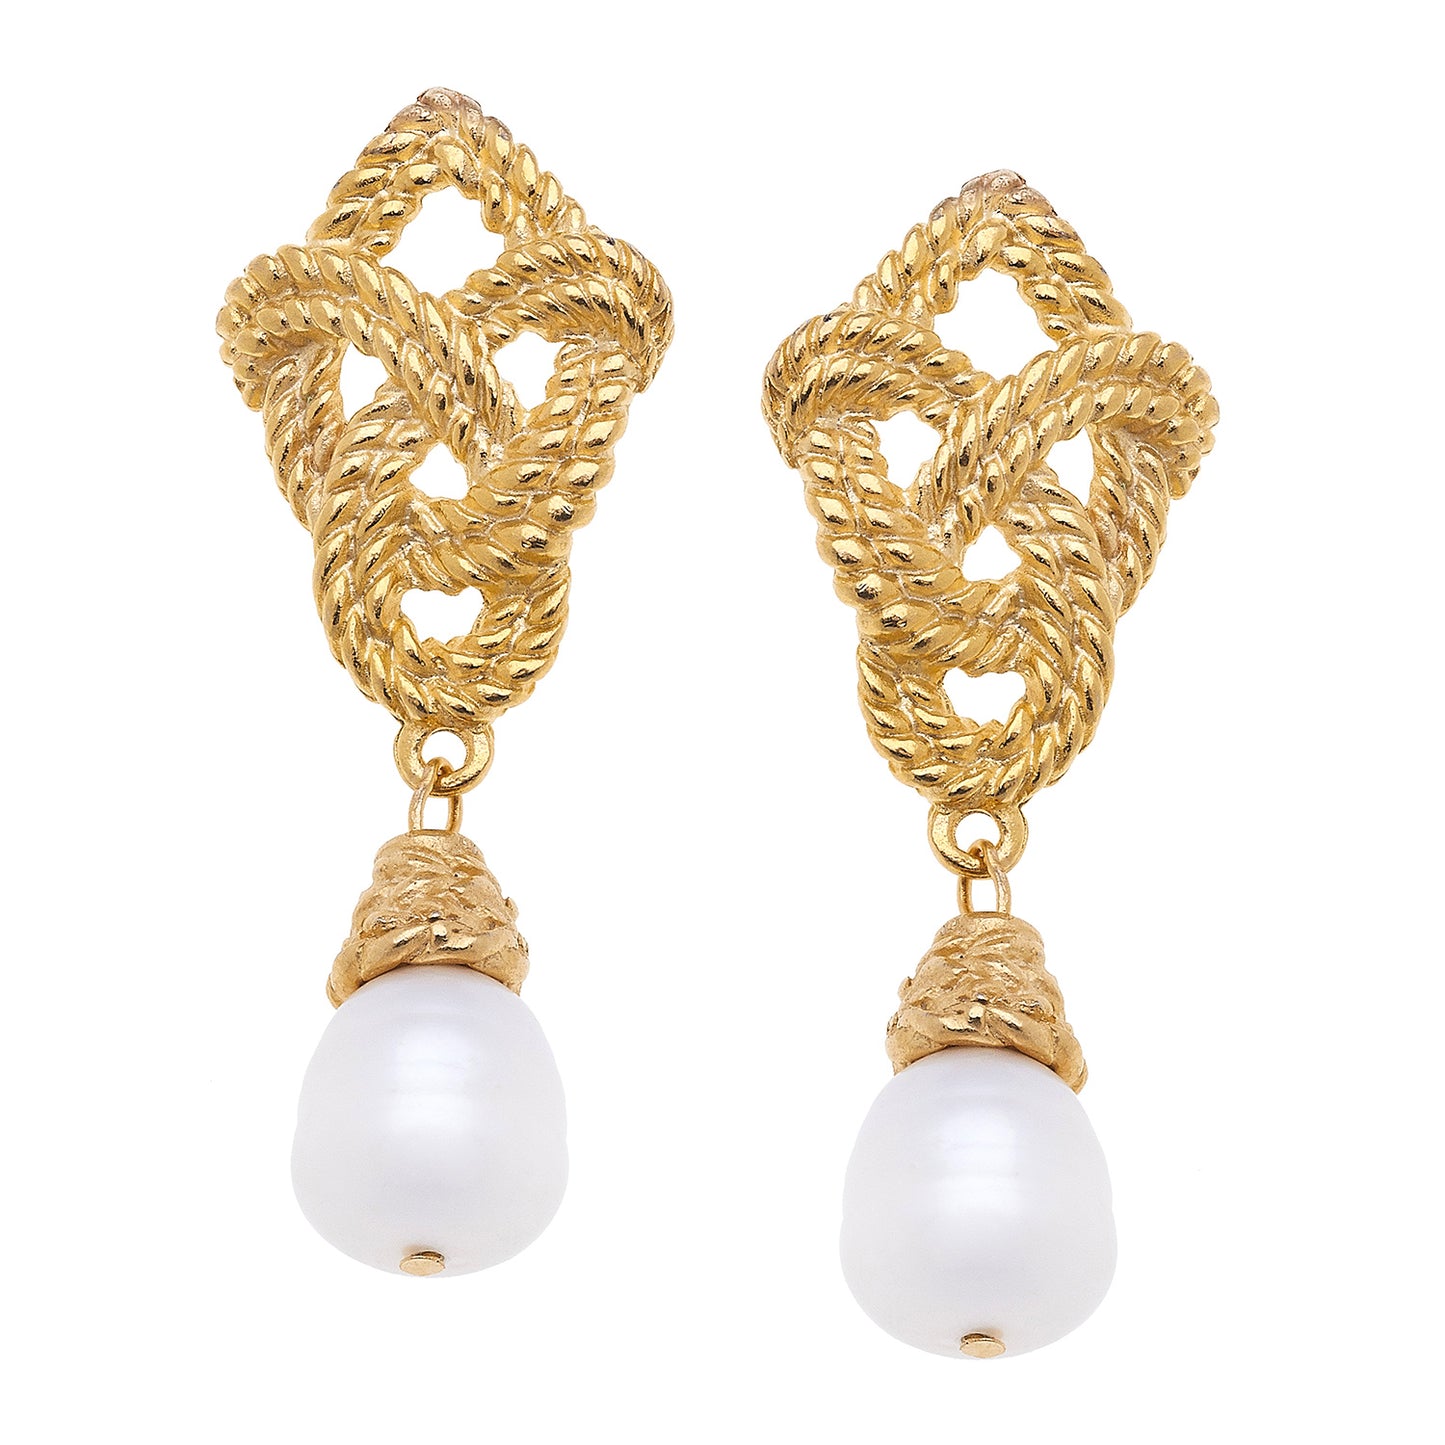 Susan Shaw's handcrafted Gold and Freshwater Pearl drop earrings are about an inch in length and feature a post-style closure. Get ready to add a touch of playful elegance to your look with these quirky, genuine pearl earrings!